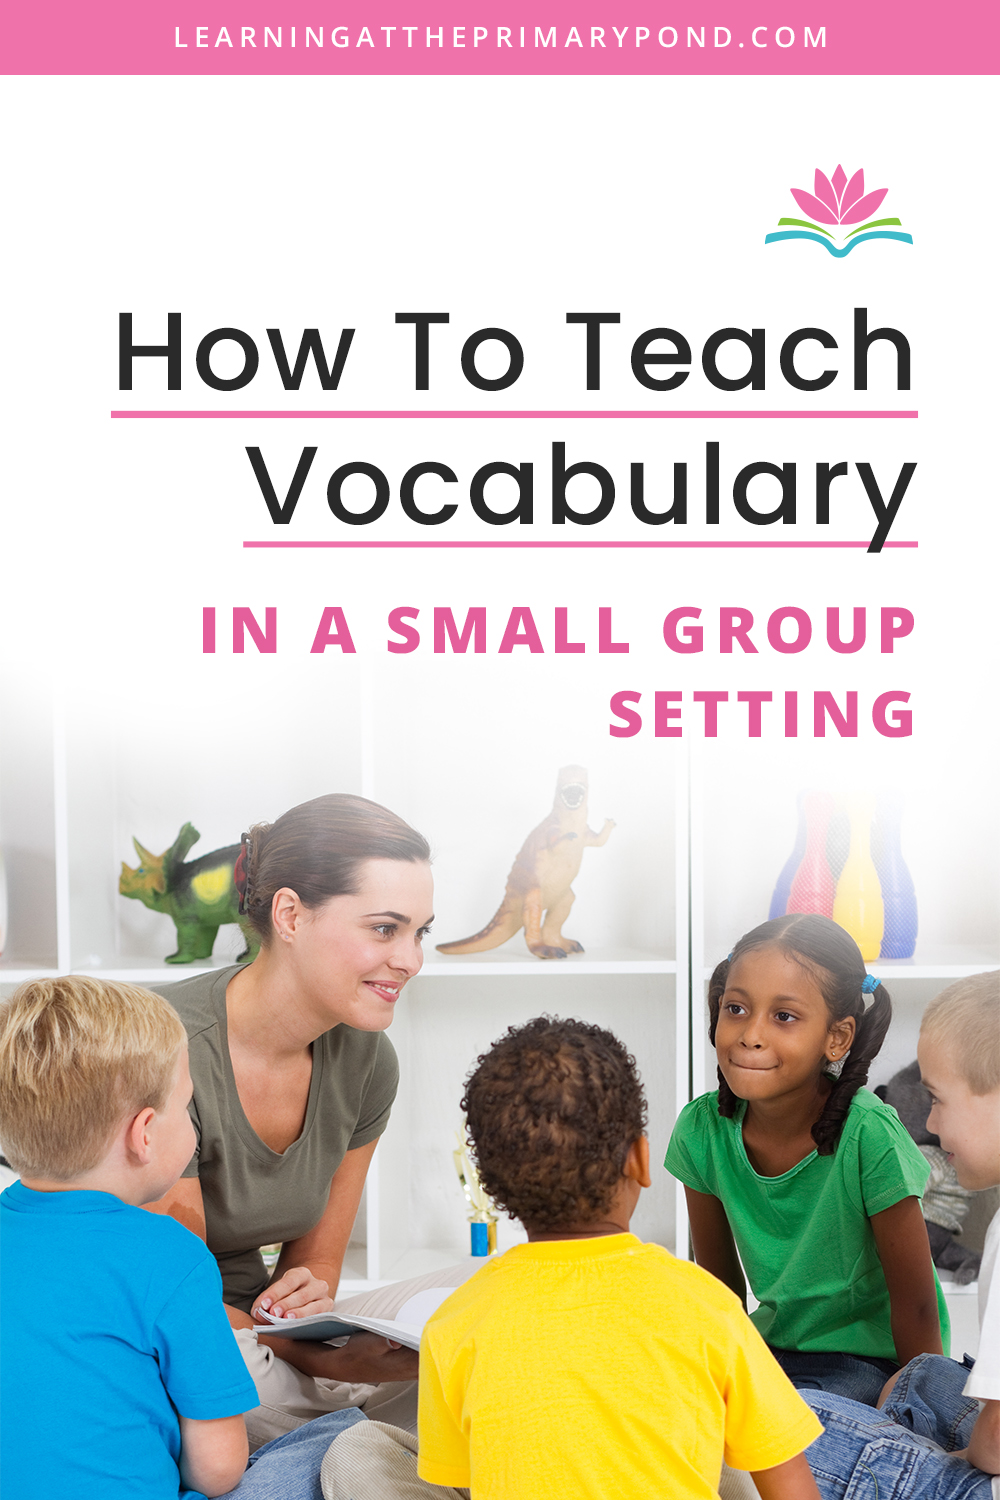 How To Teach Vocabulary In A Small Group Setting